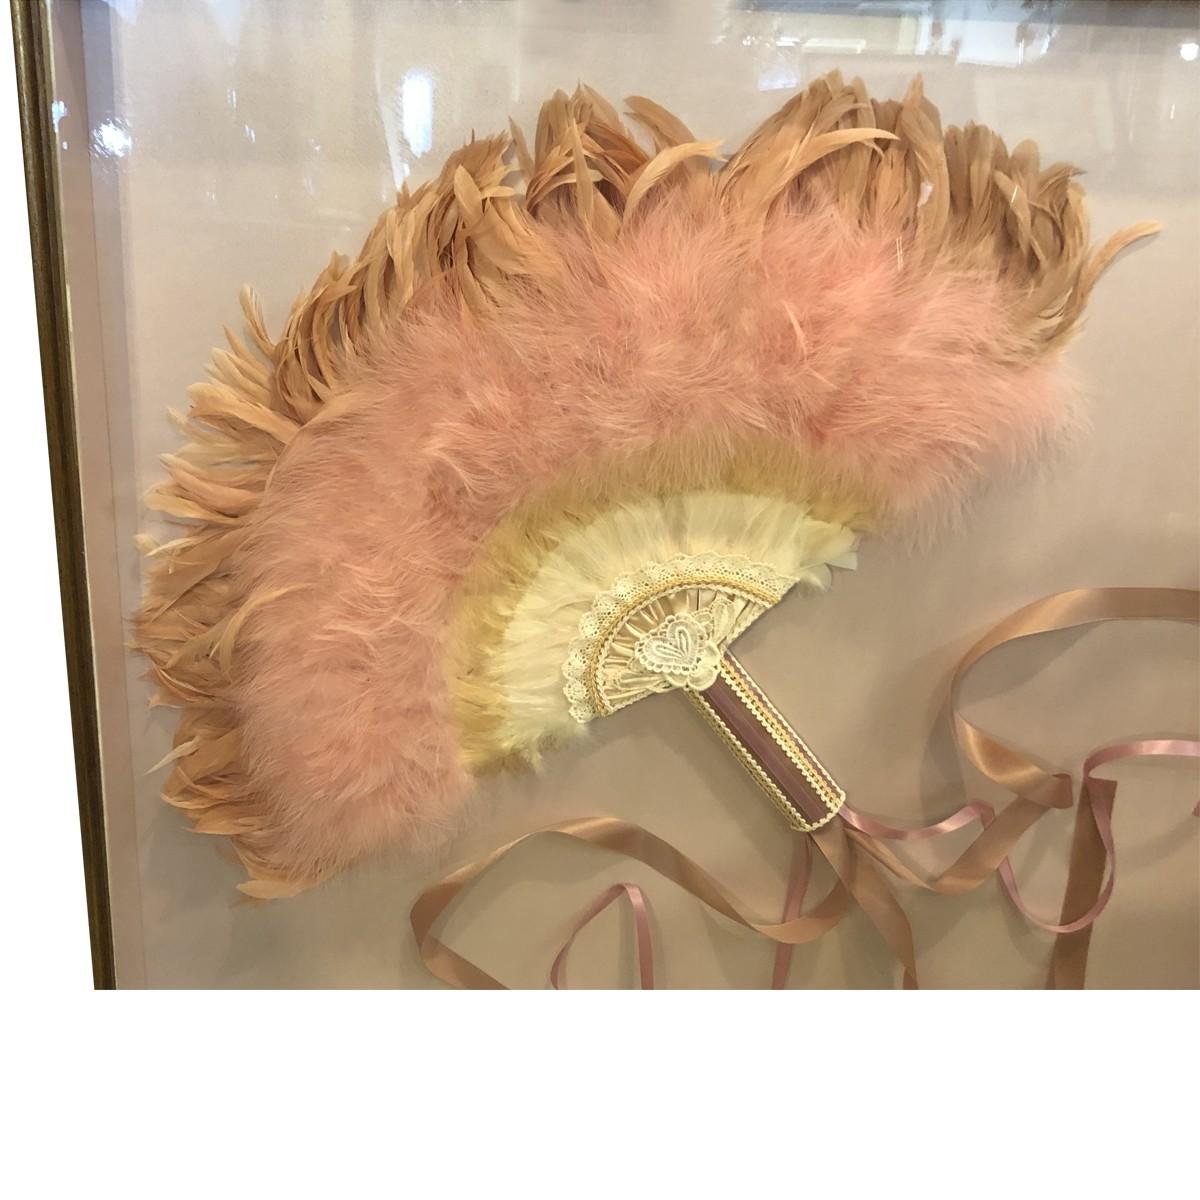 Description
Pink feathers.
Silk ribbons.
Glazed with acrylic.
Molded giltwood frame.
Materials silk, giltwood, feathers
Dimensions
Width 33.50